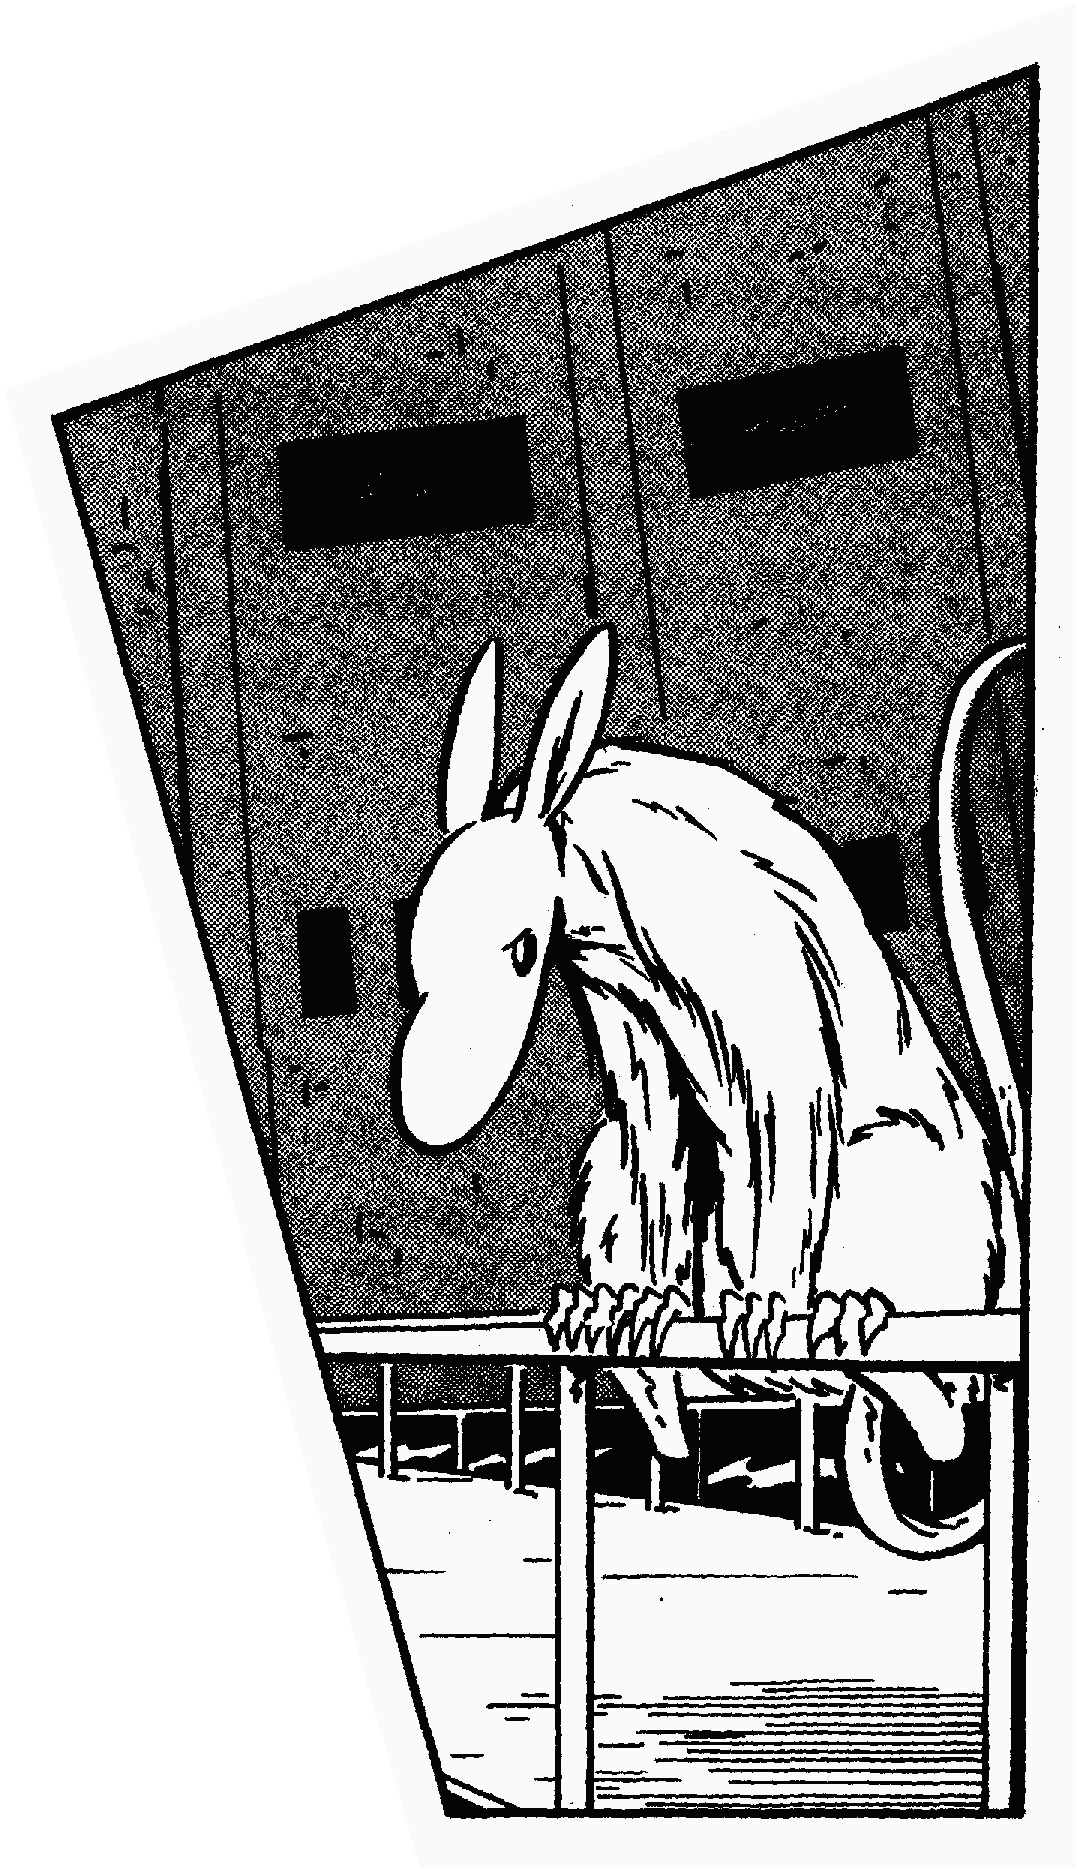 Comic-type drawing of alien creature, resembling large ship rat with donkey ears, perching on a metal barrier